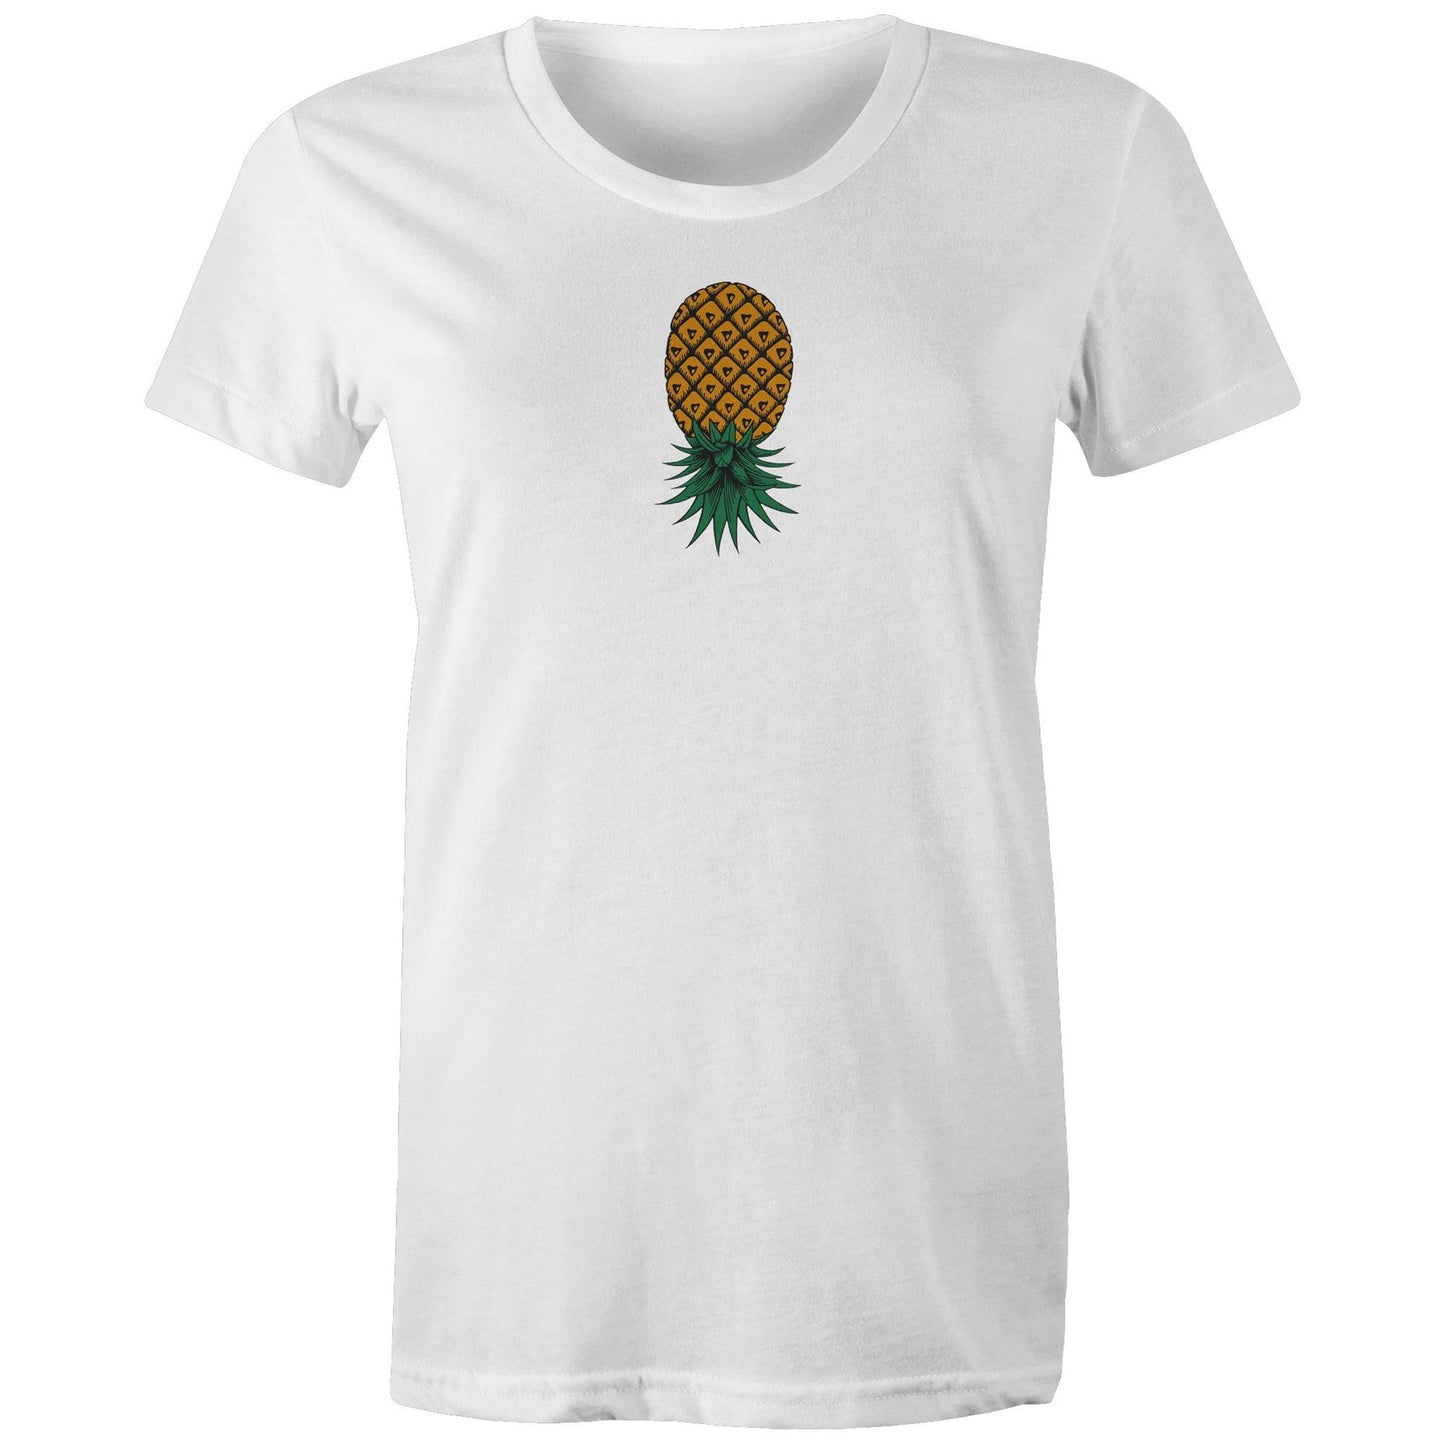 Upside Down Pineapple T Shirts for Women